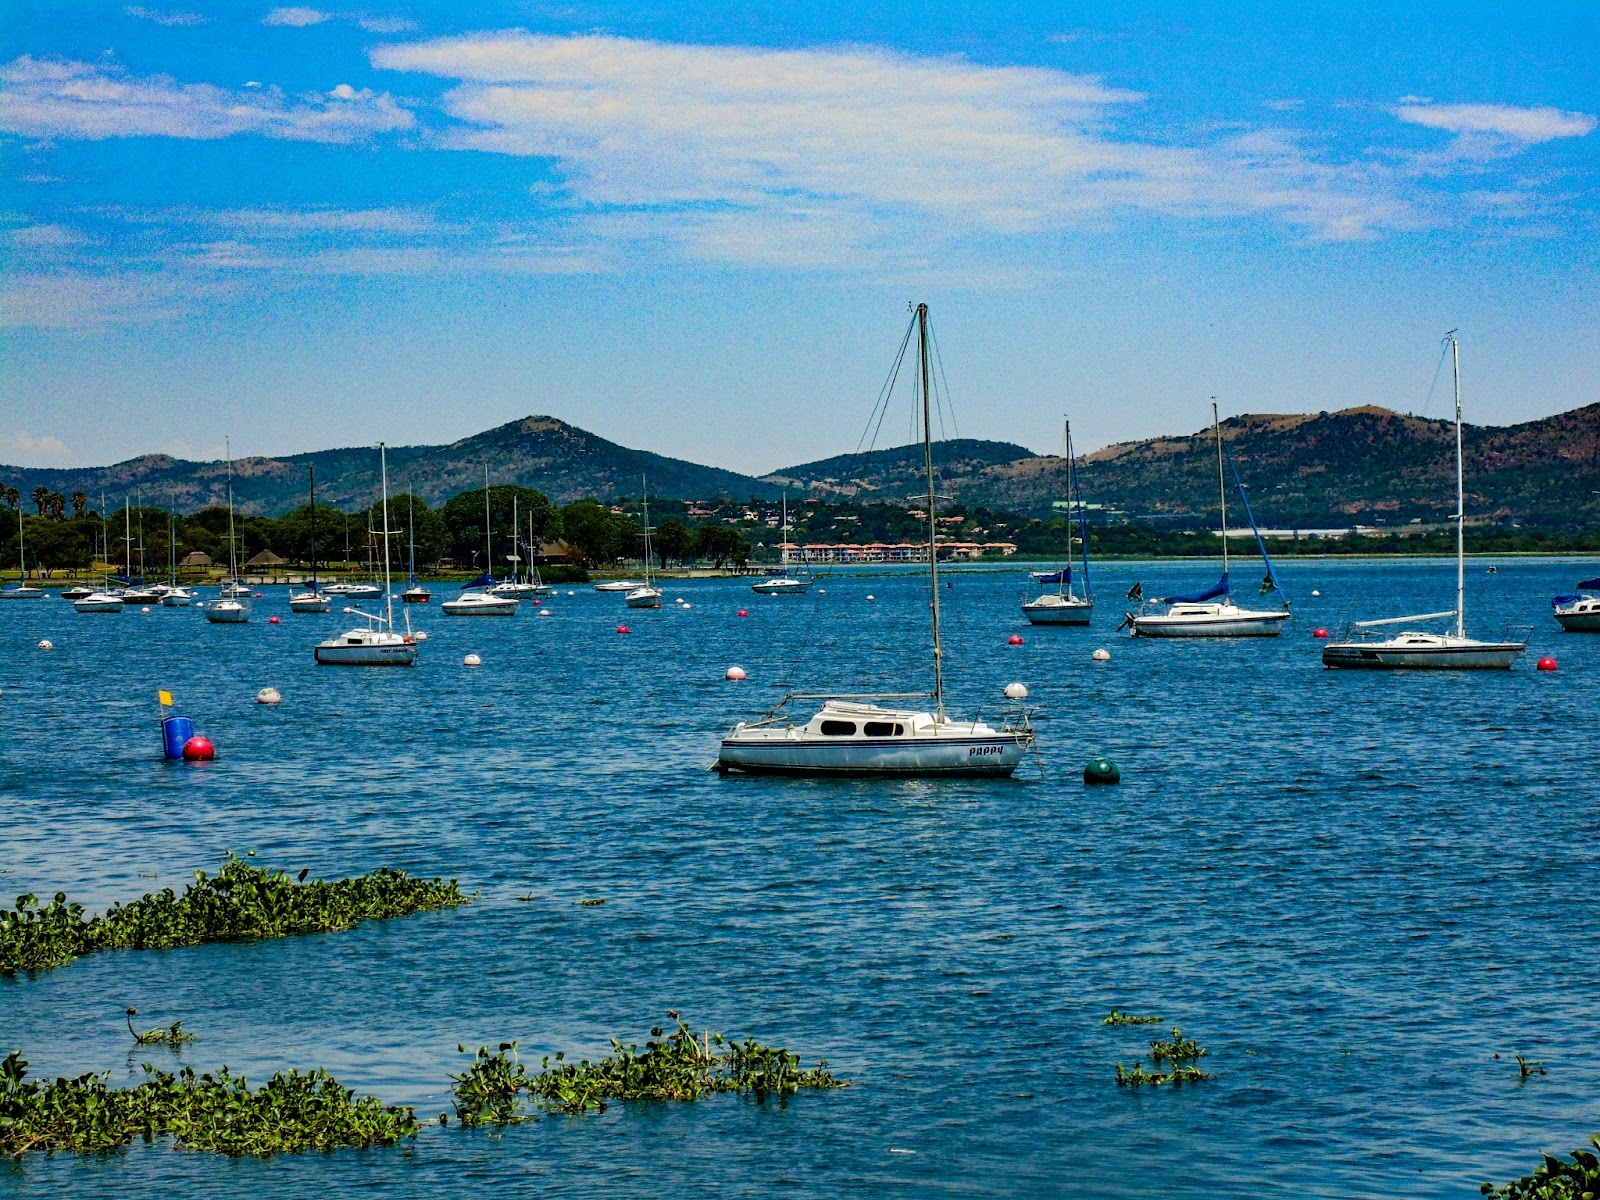 Picturesque view of boats on Hartbeespoort Dam